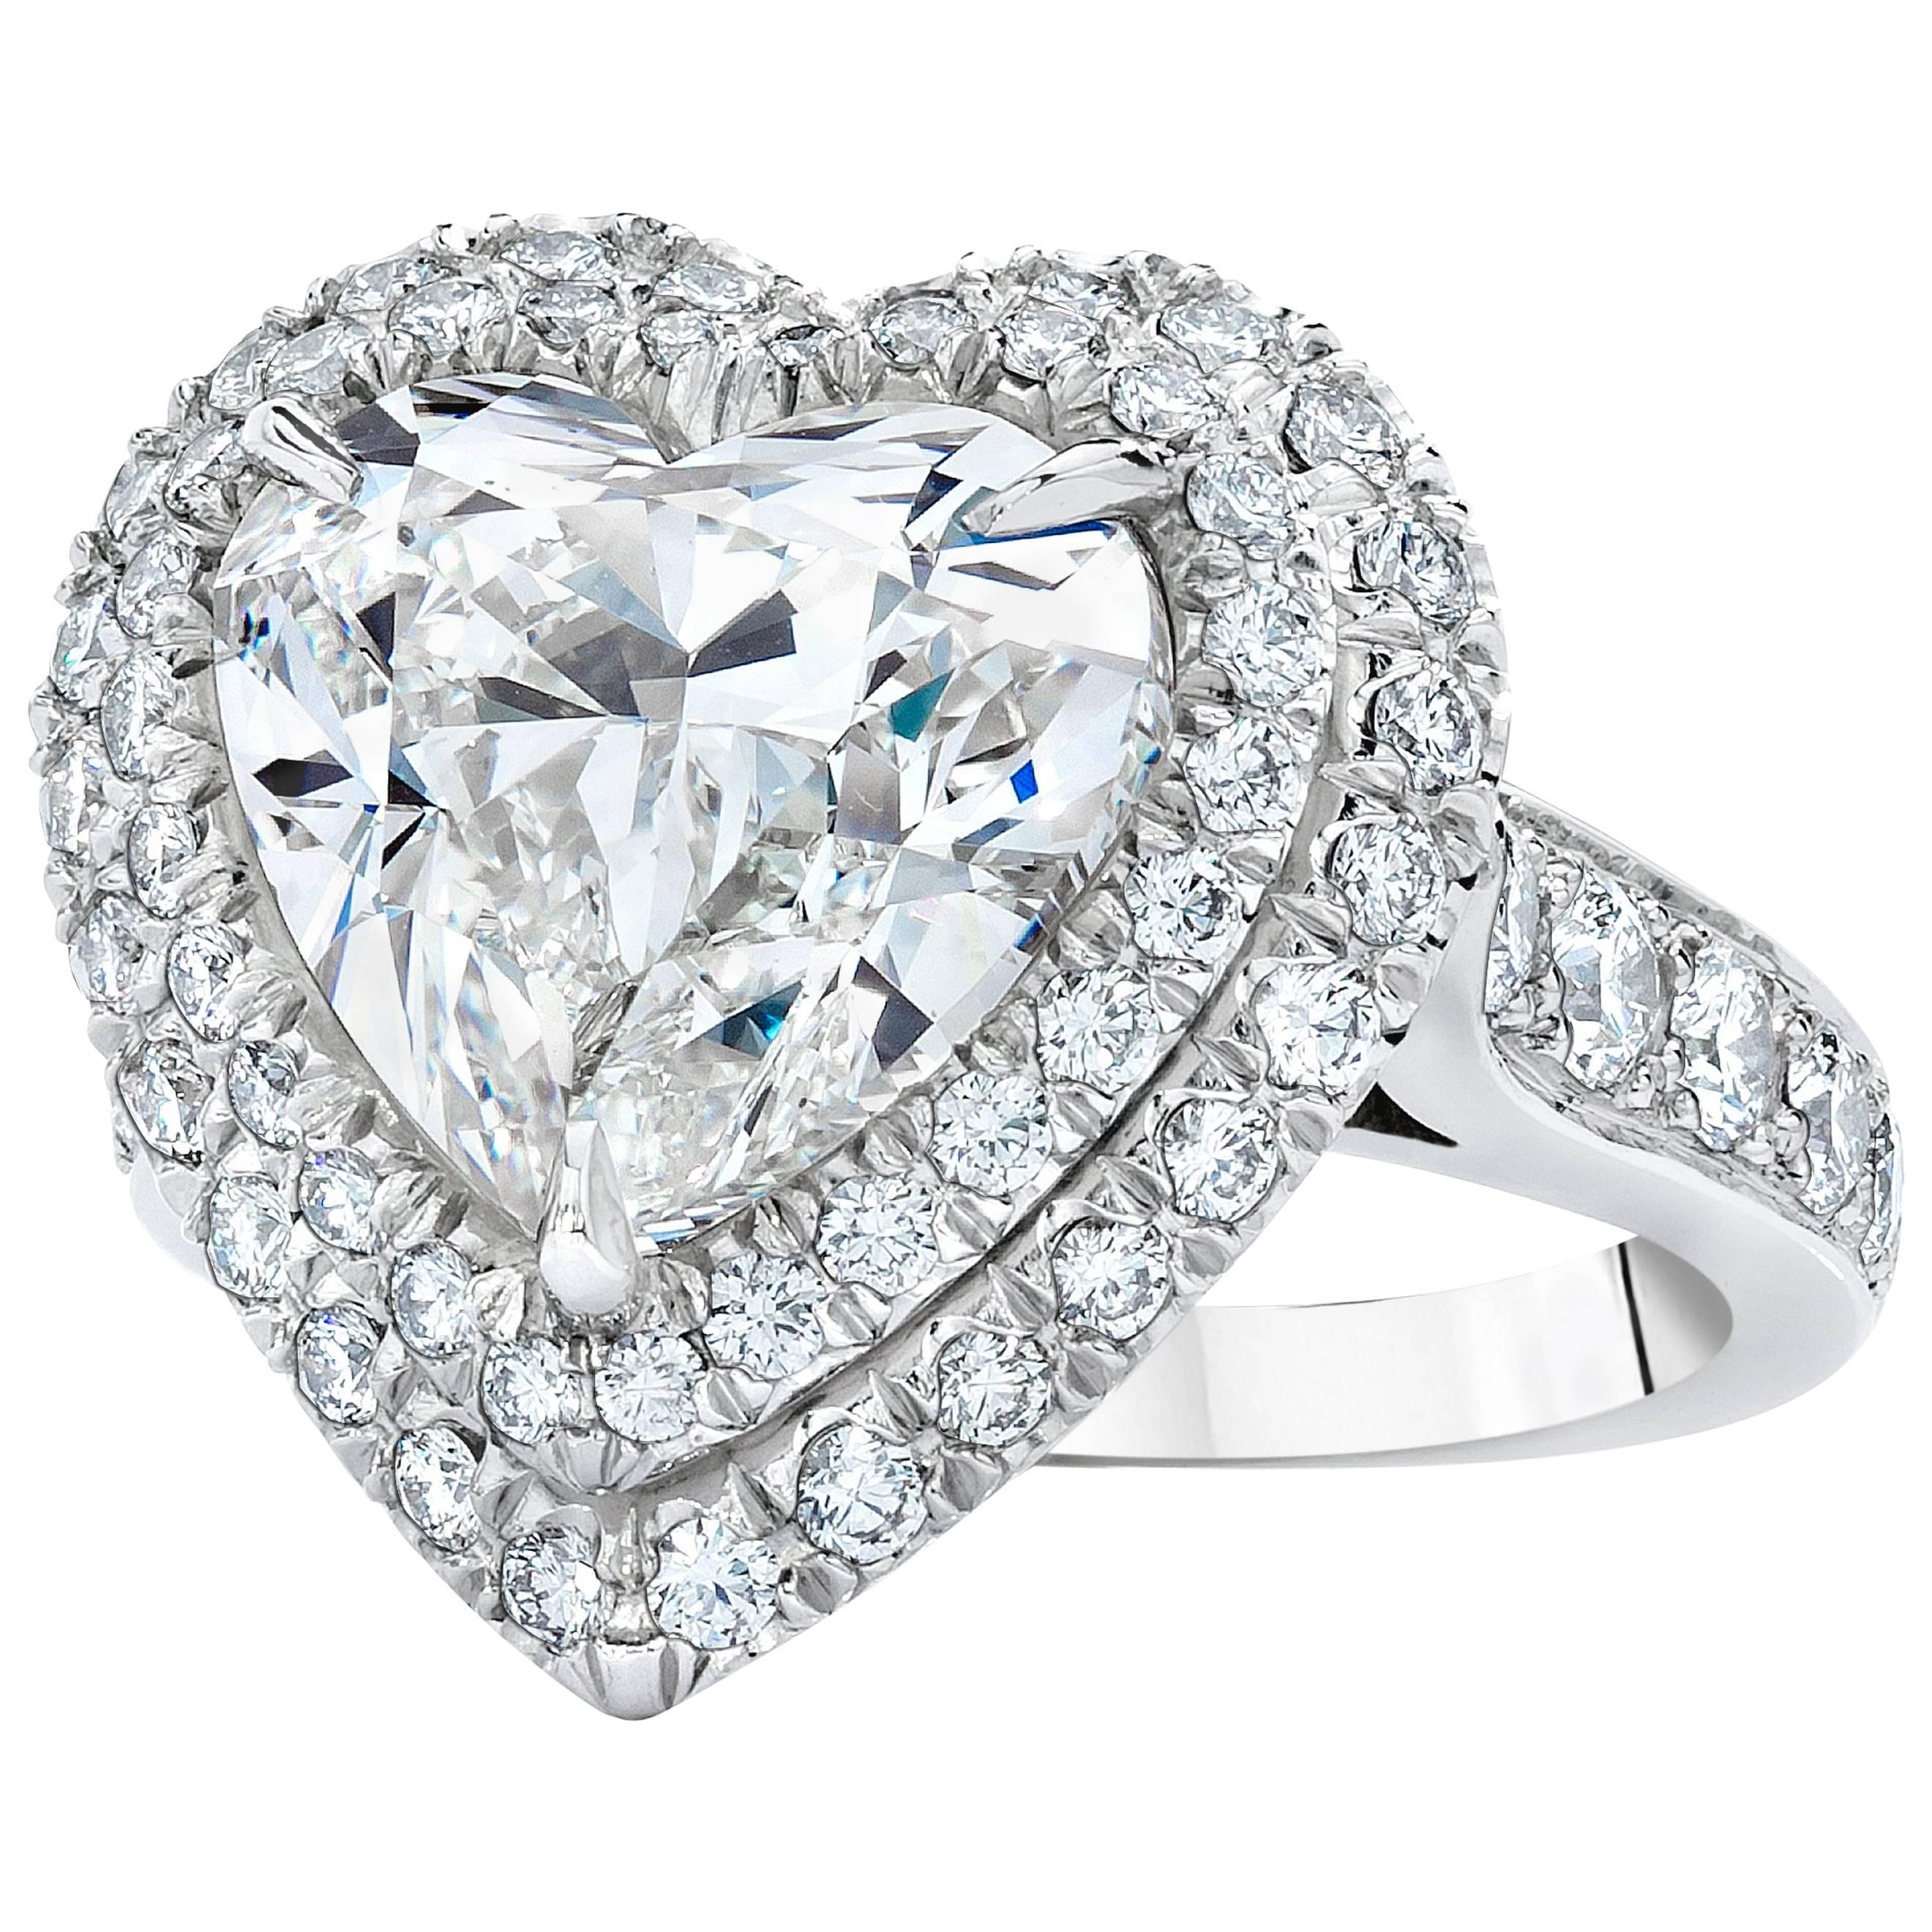 GIA Certified Heart-Shaped 5.01 carat Diamond Halo Engagement Ring